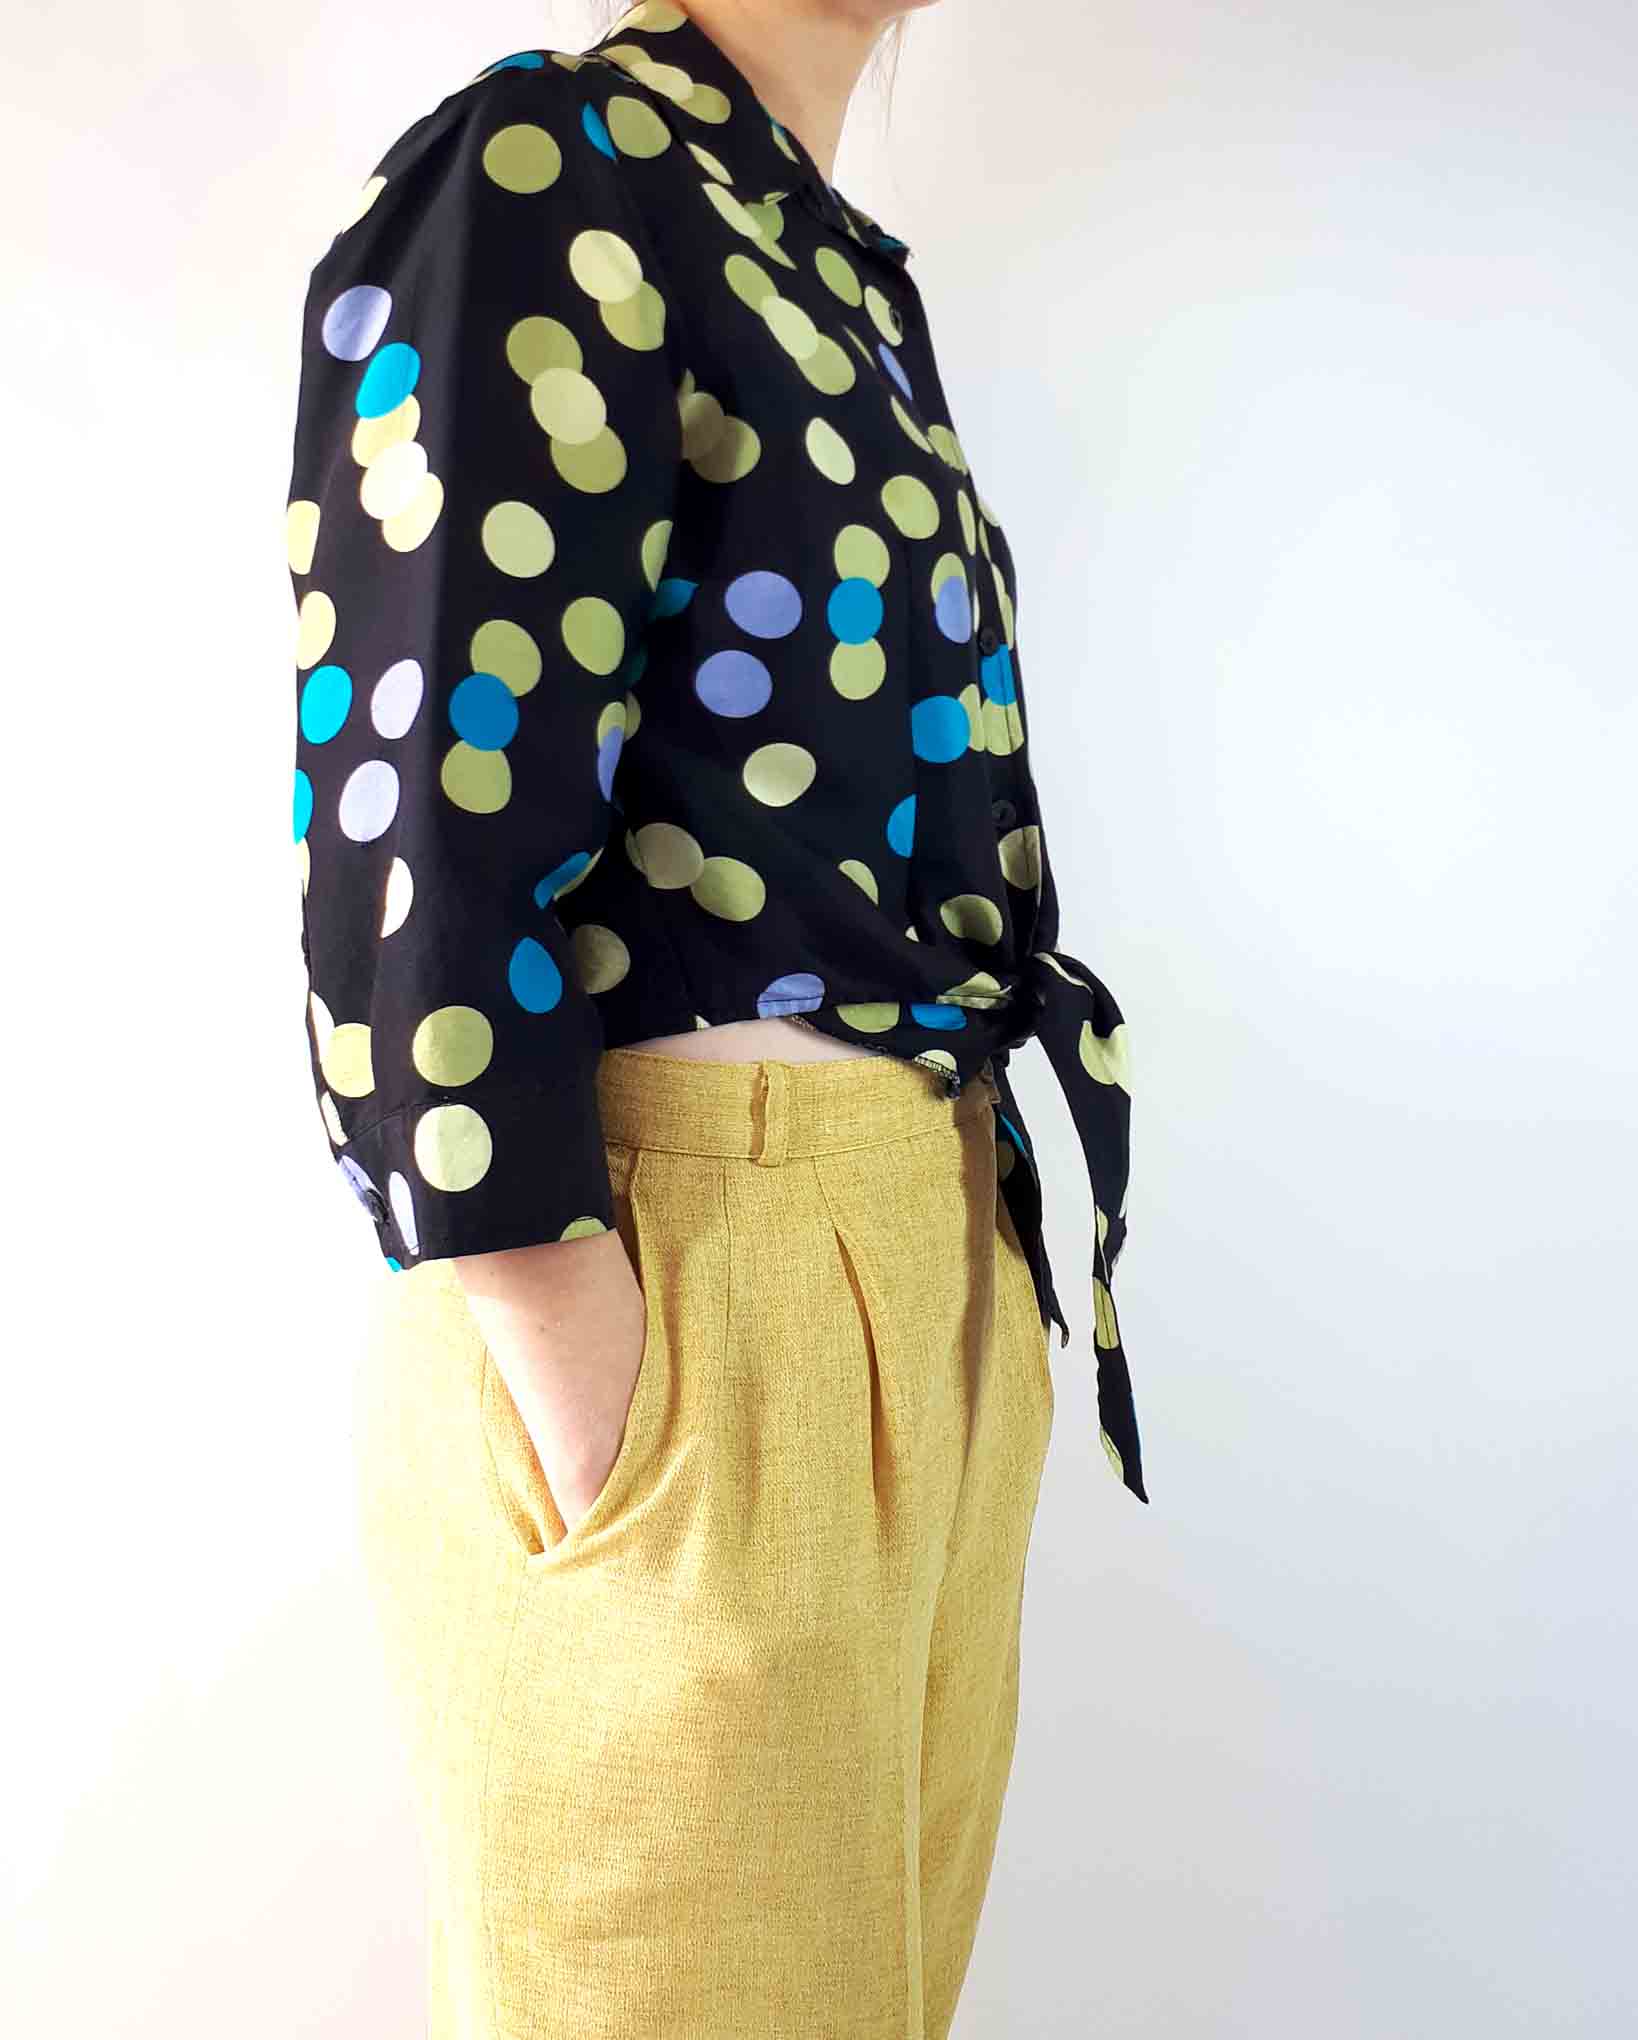 Vintage Silk Cropped Blouse with Polka Dots and Front Tie